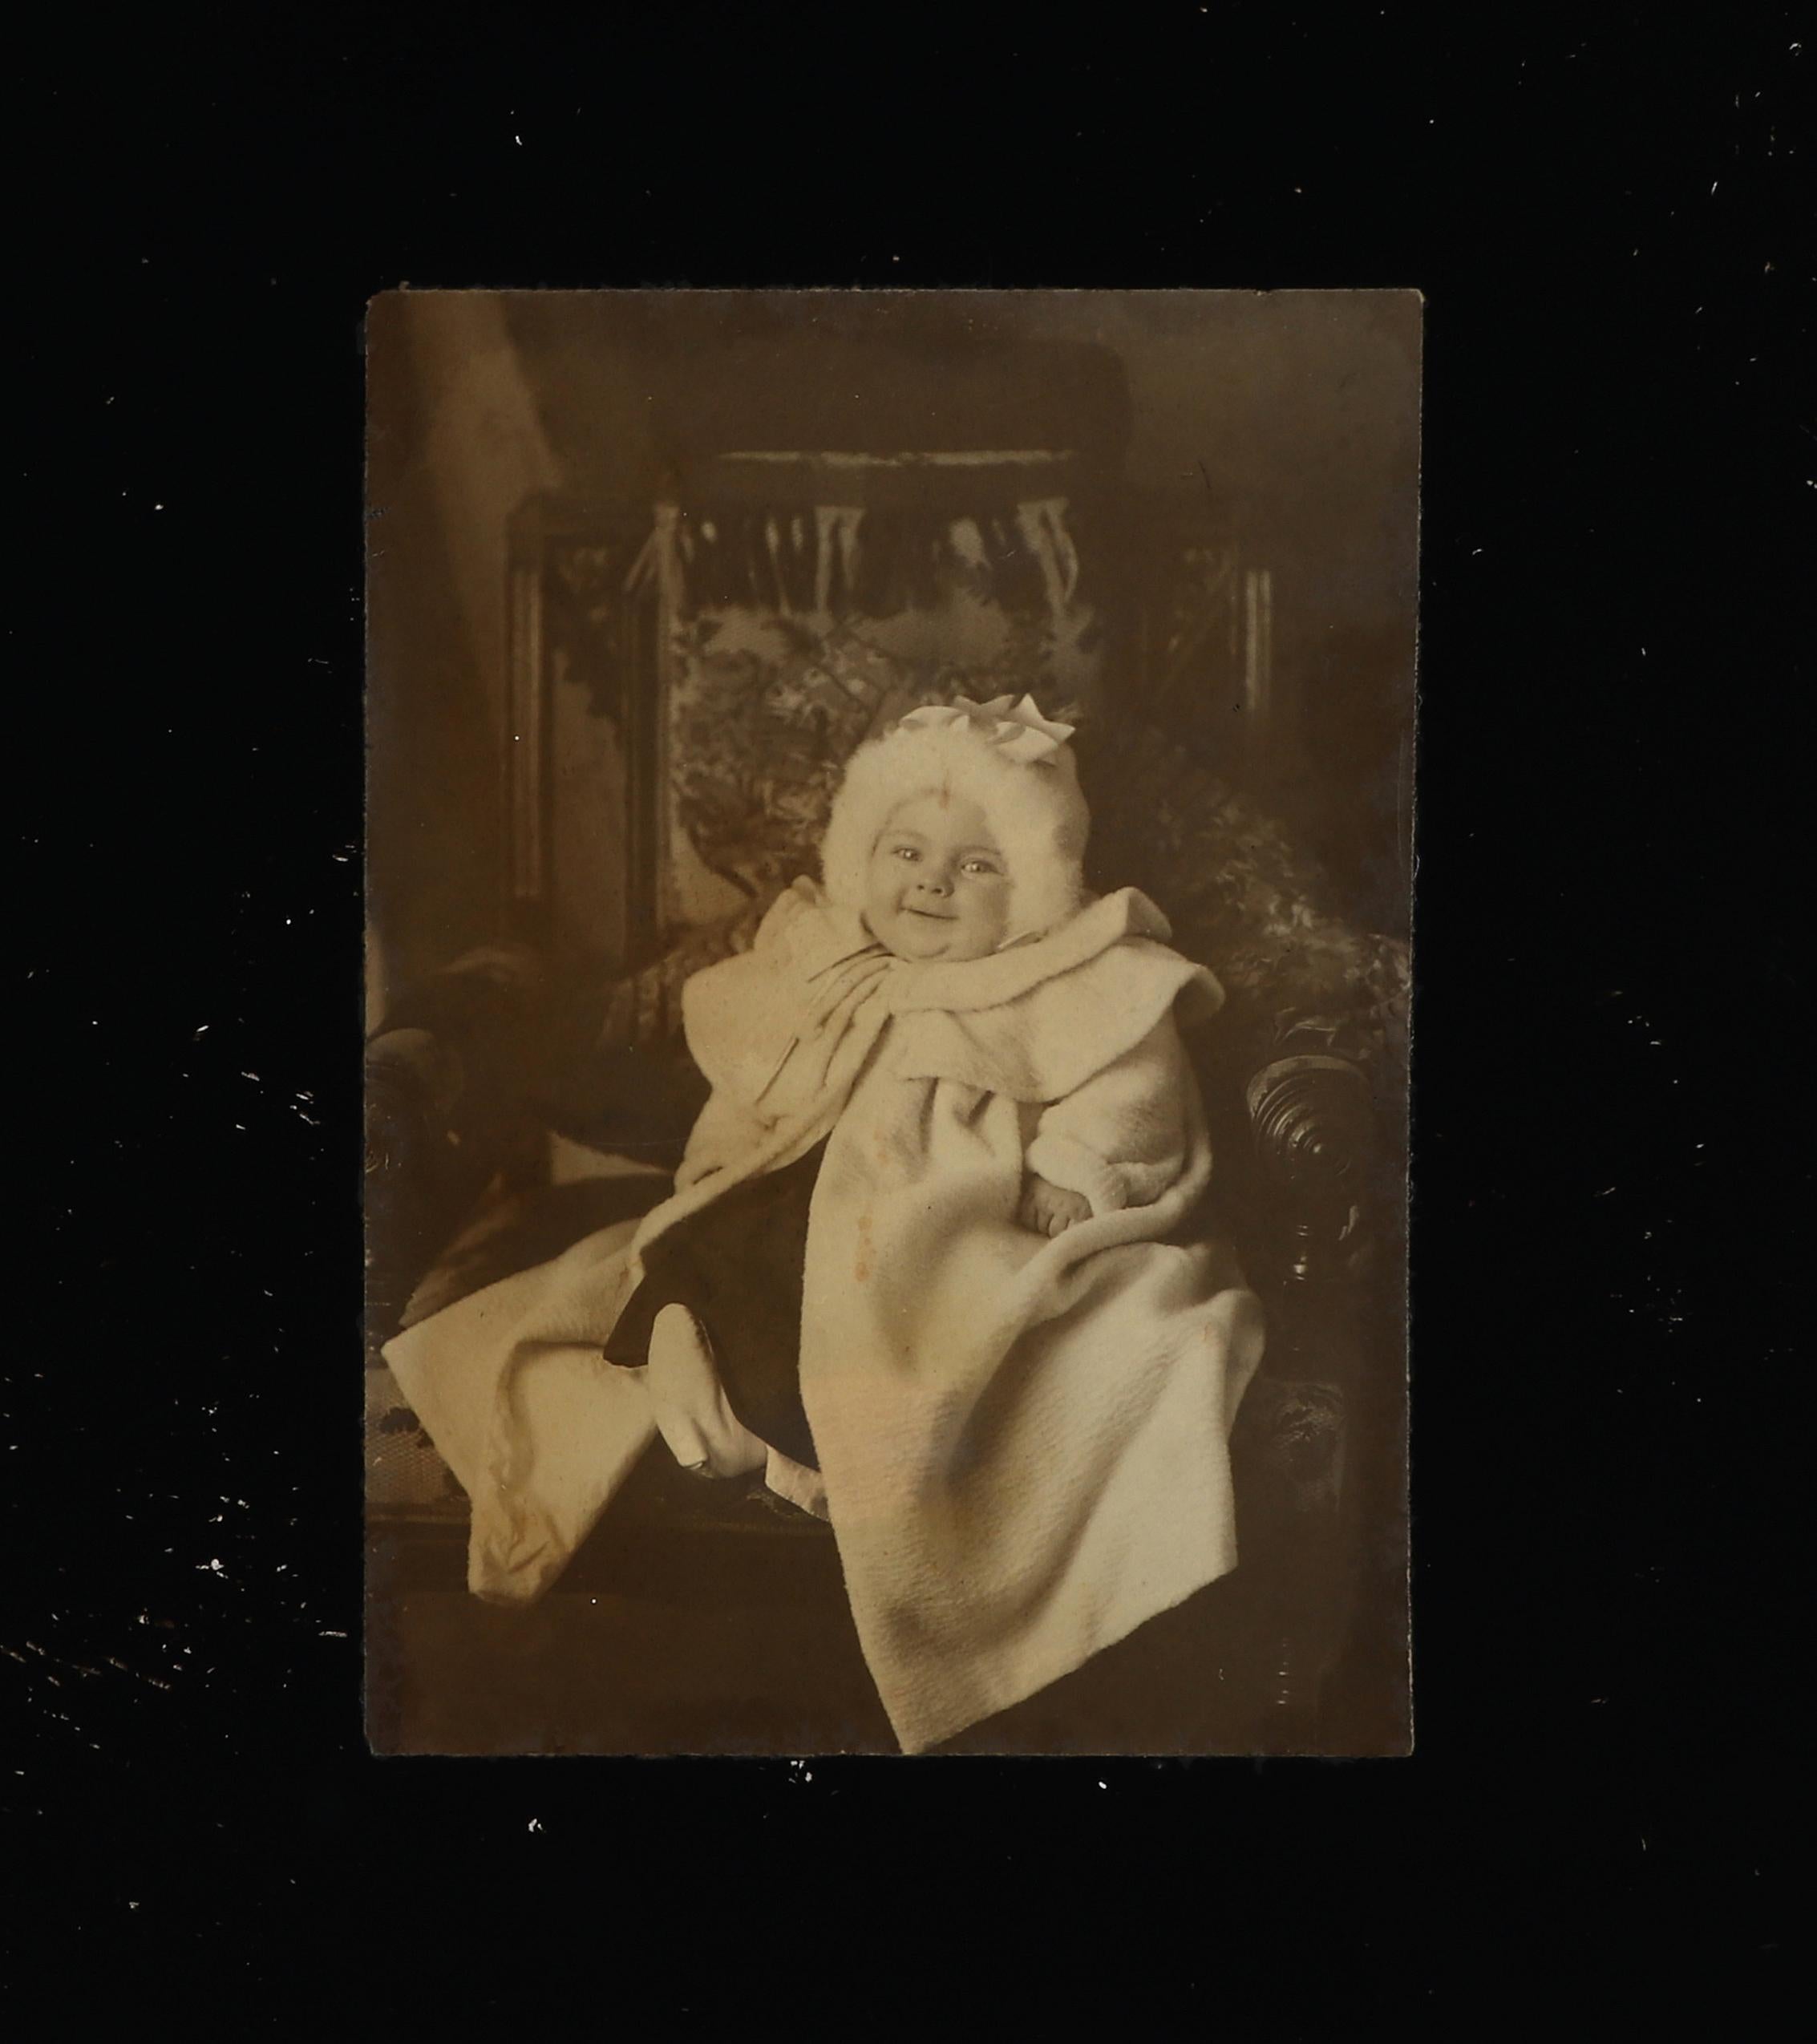 Rare and original example of an early photographic process, Ambrotype. Circa late 1850's to early 1860's. An ambrotype is comprised of an underexposed glass negative placed against a dark background. The dark backing material creates a positive